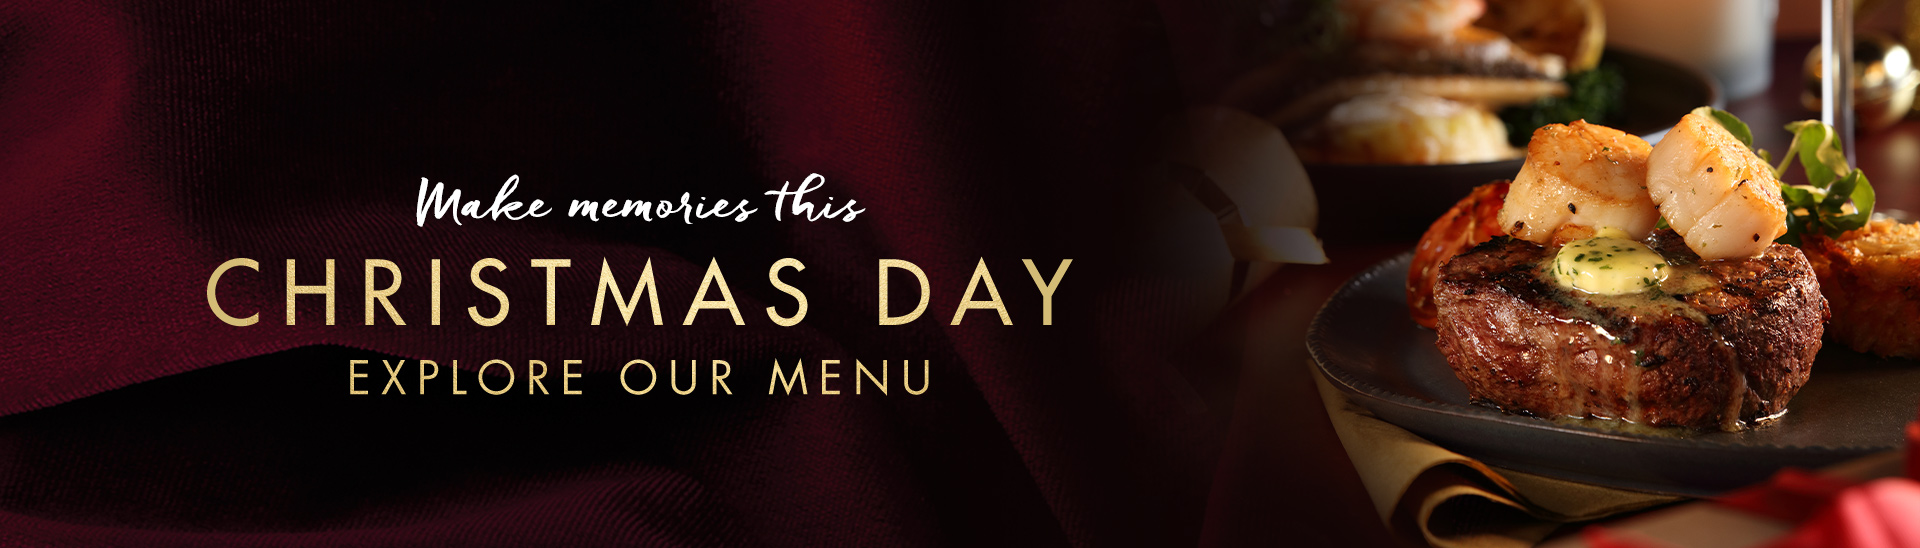 Christmas Day menu at Miller & Carter Cardiff Hayes